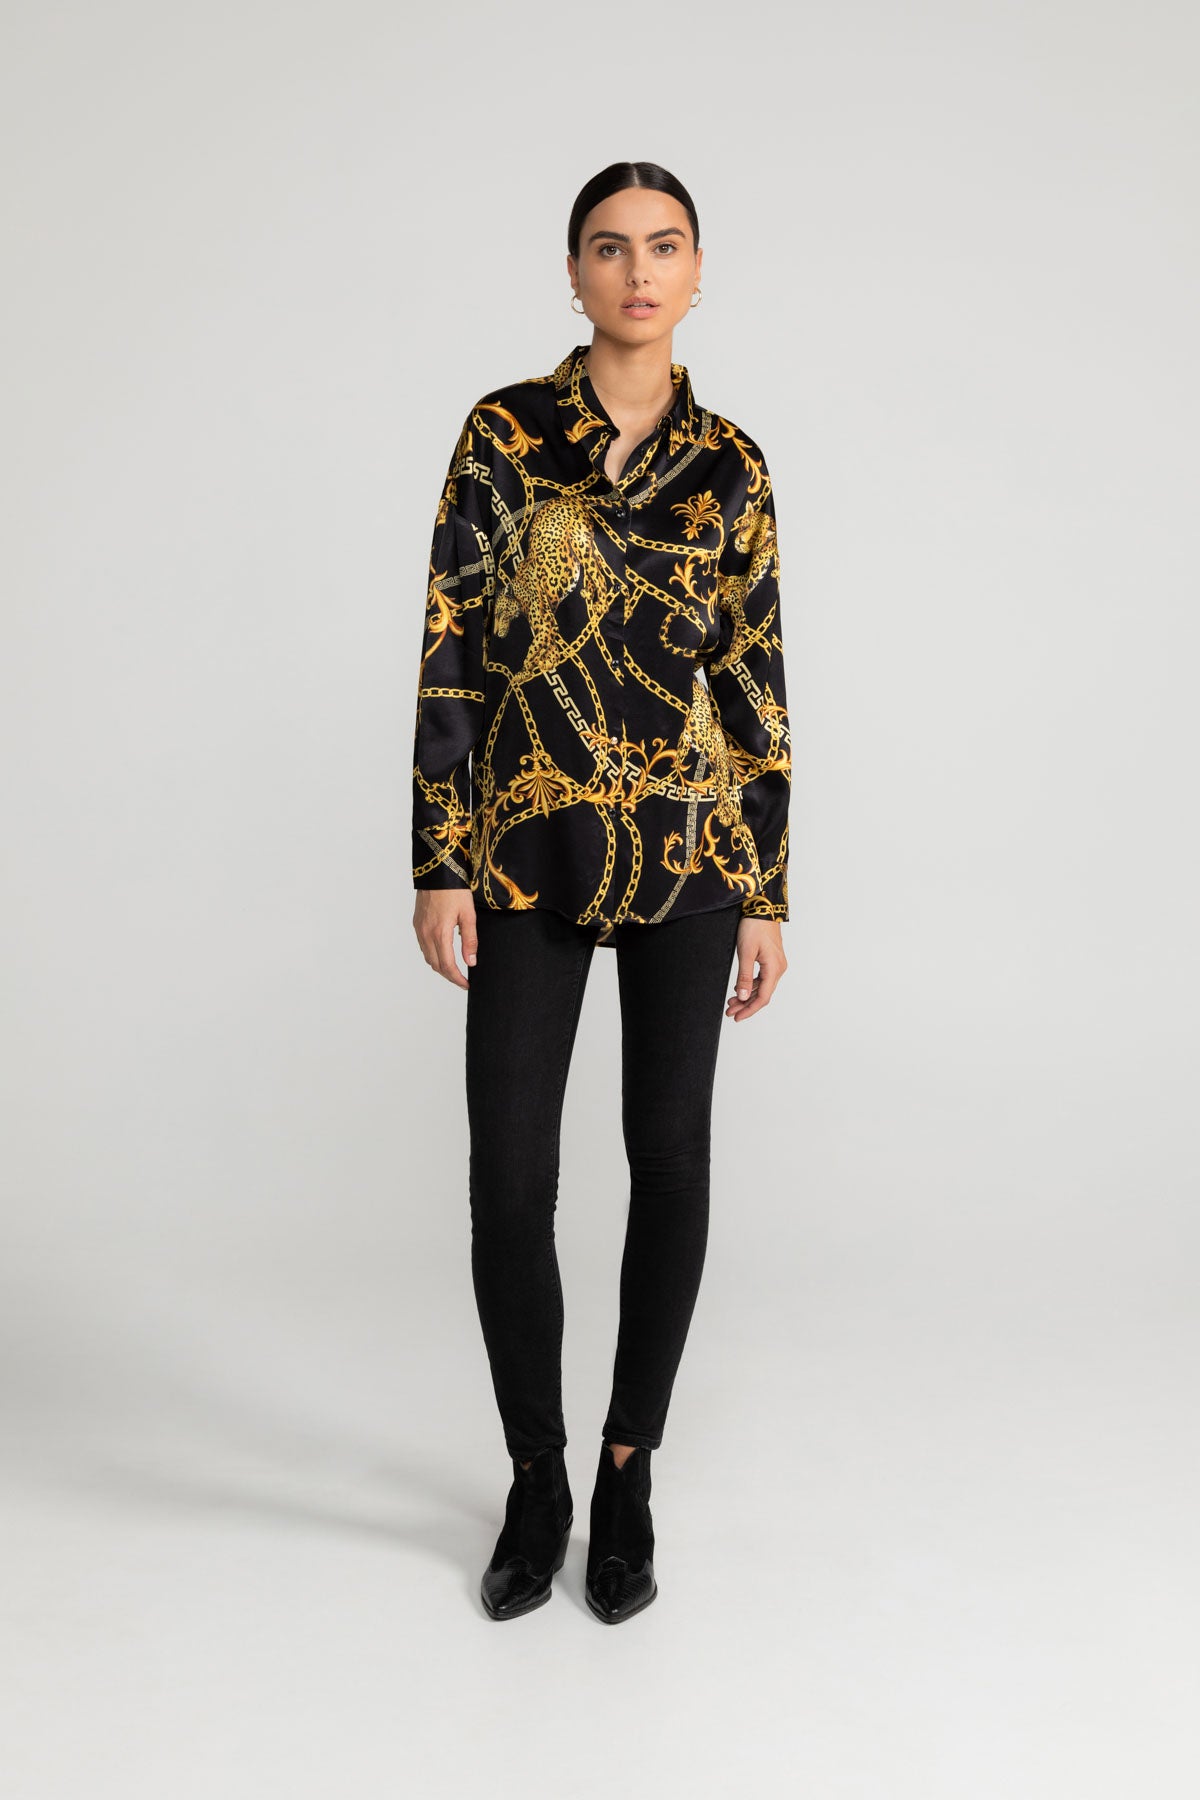 Alaiya blouse in black and gold pattern by LOVJOI made of ENKA™ viscose and Ecovero™